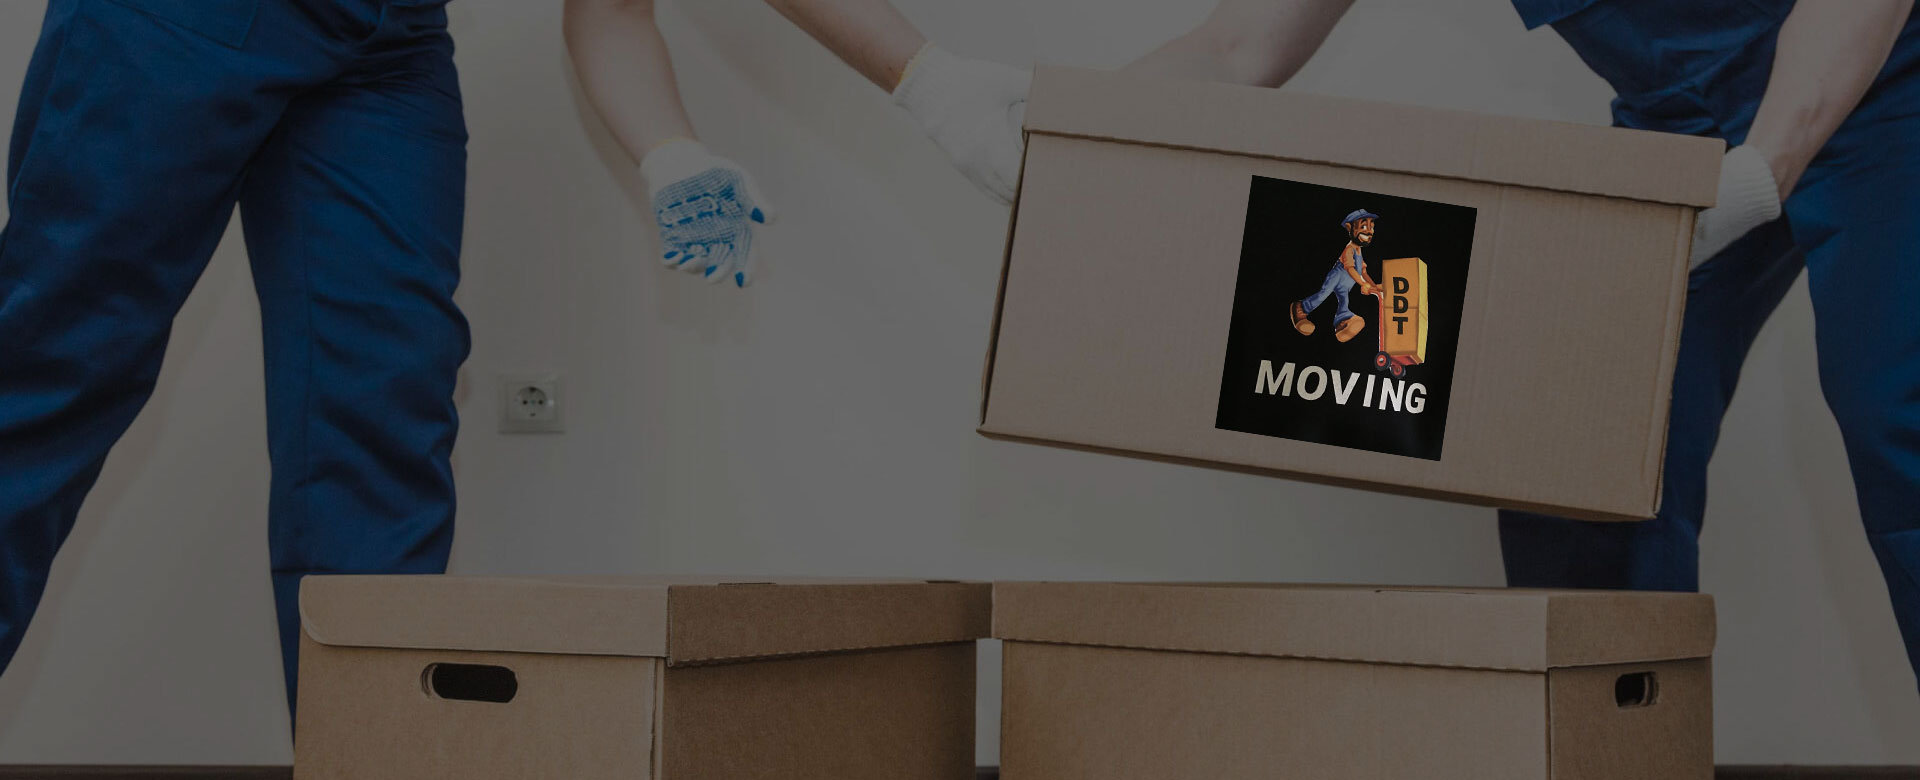 office moving company in Redford